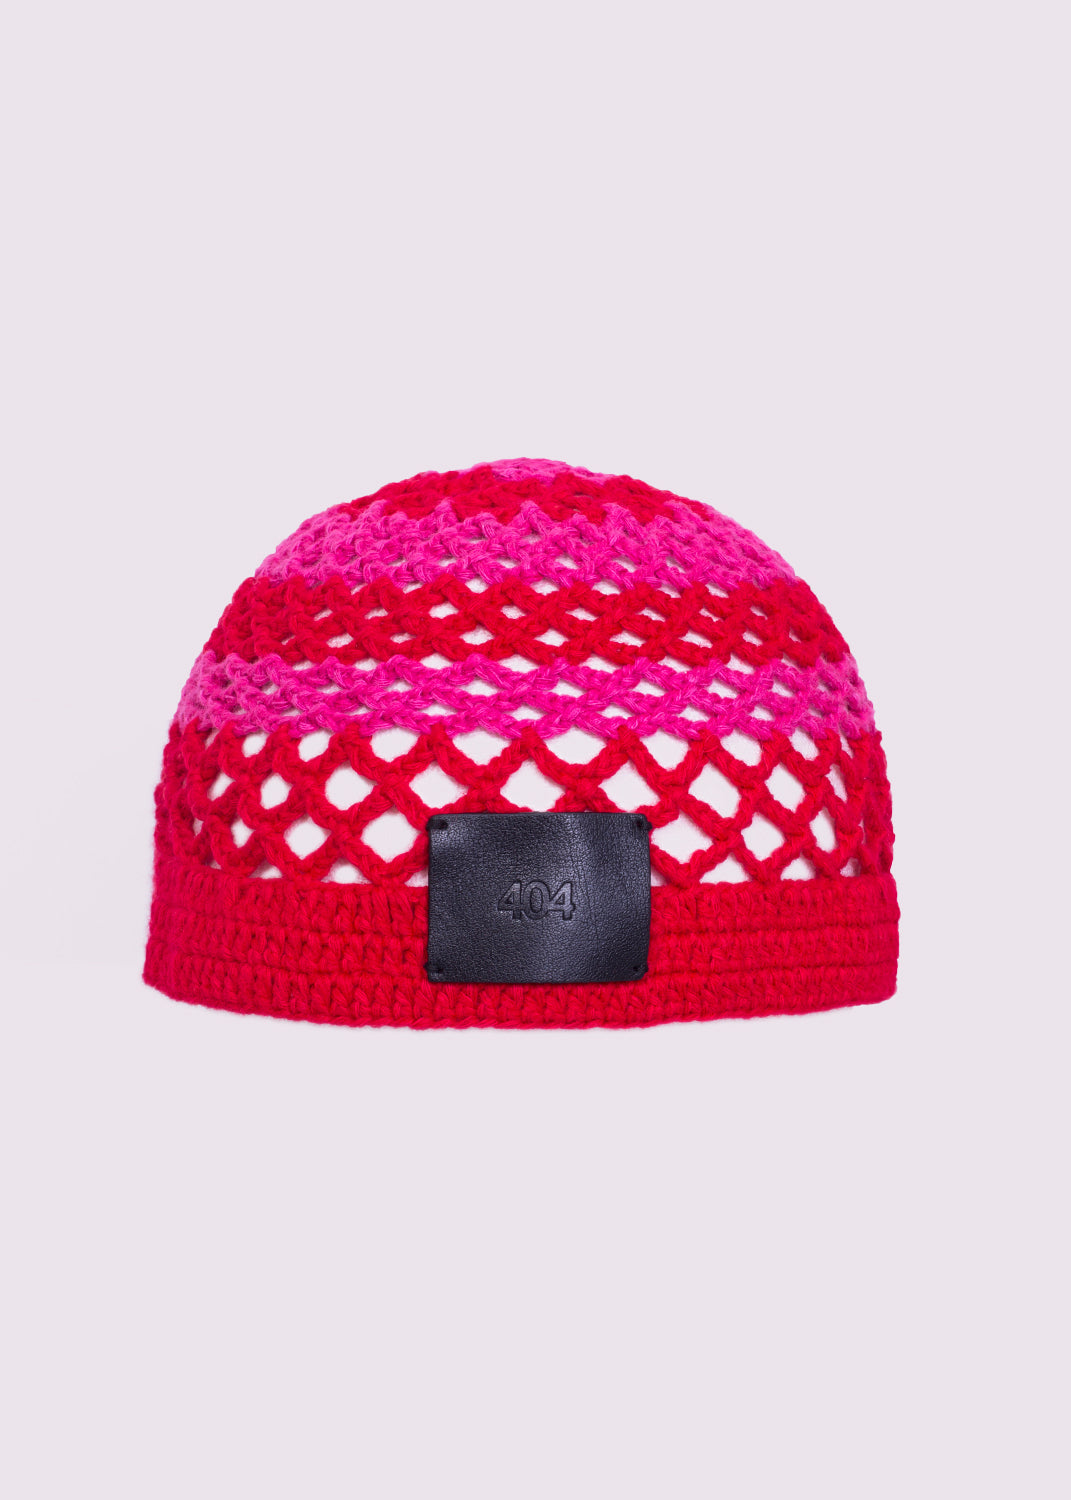 Striped Fishnet Hat in Pink and Red